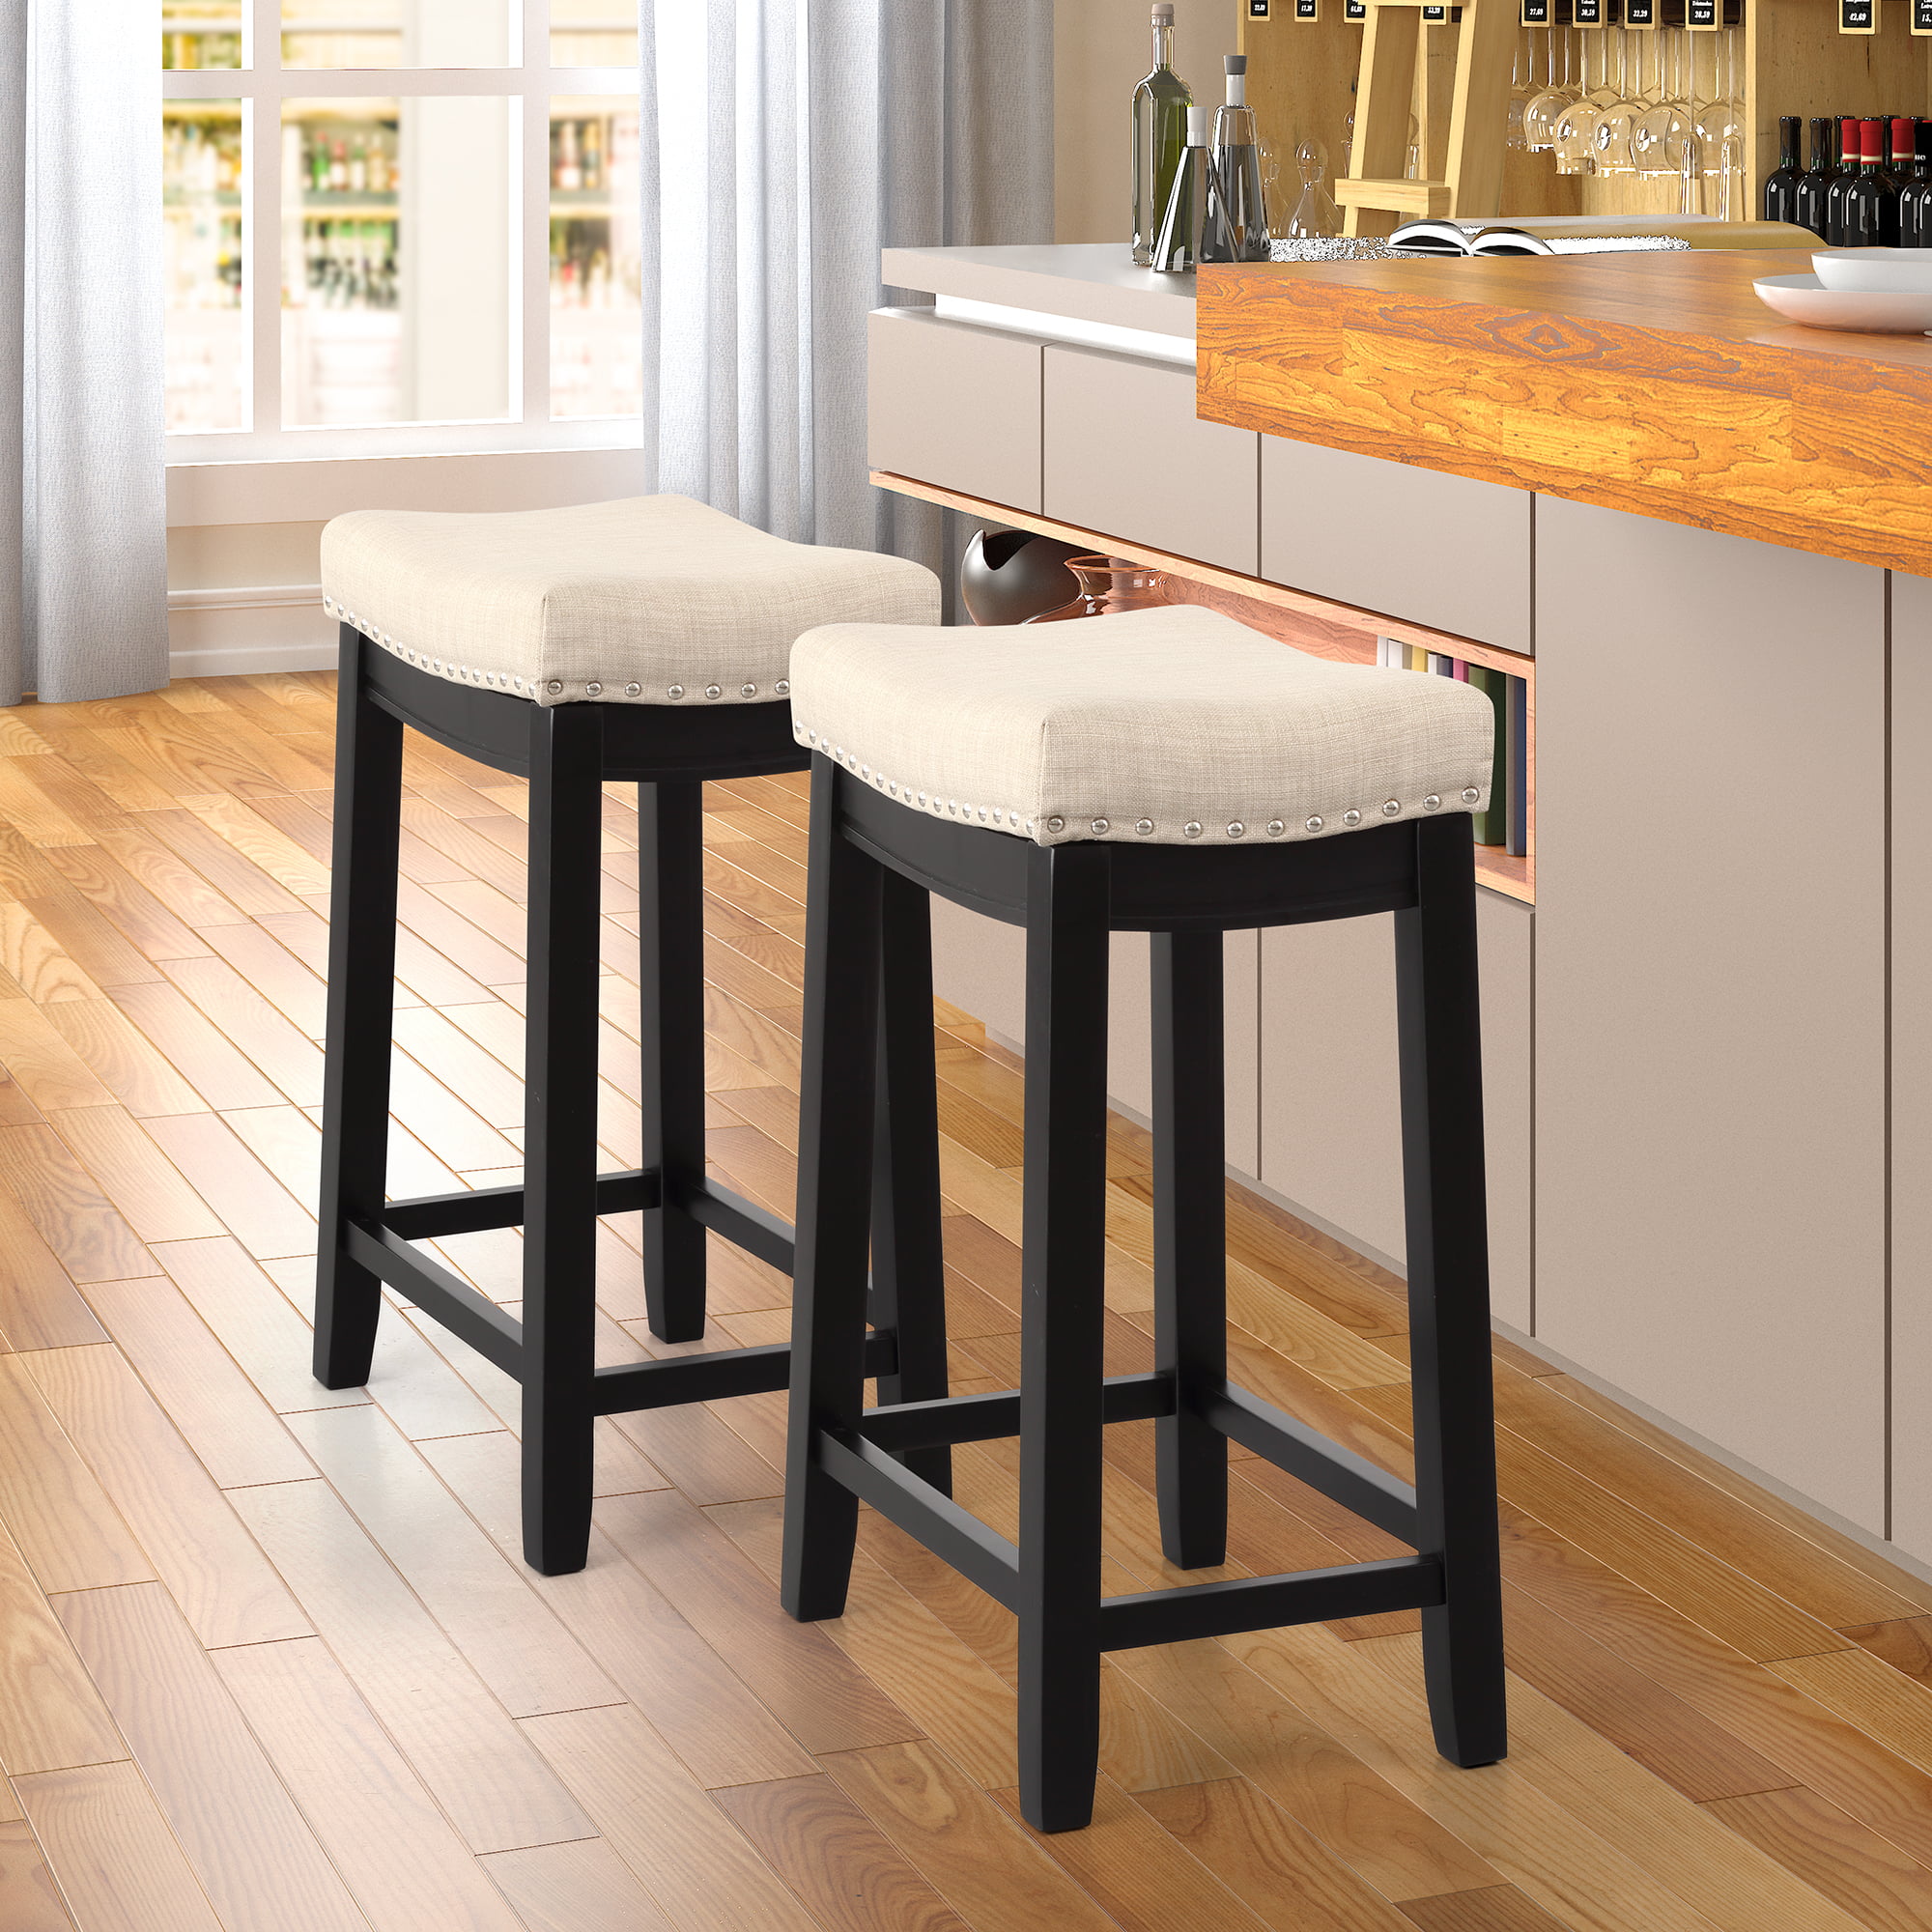 27 Inch Bar Stools in the world Don t miss out | stoolz